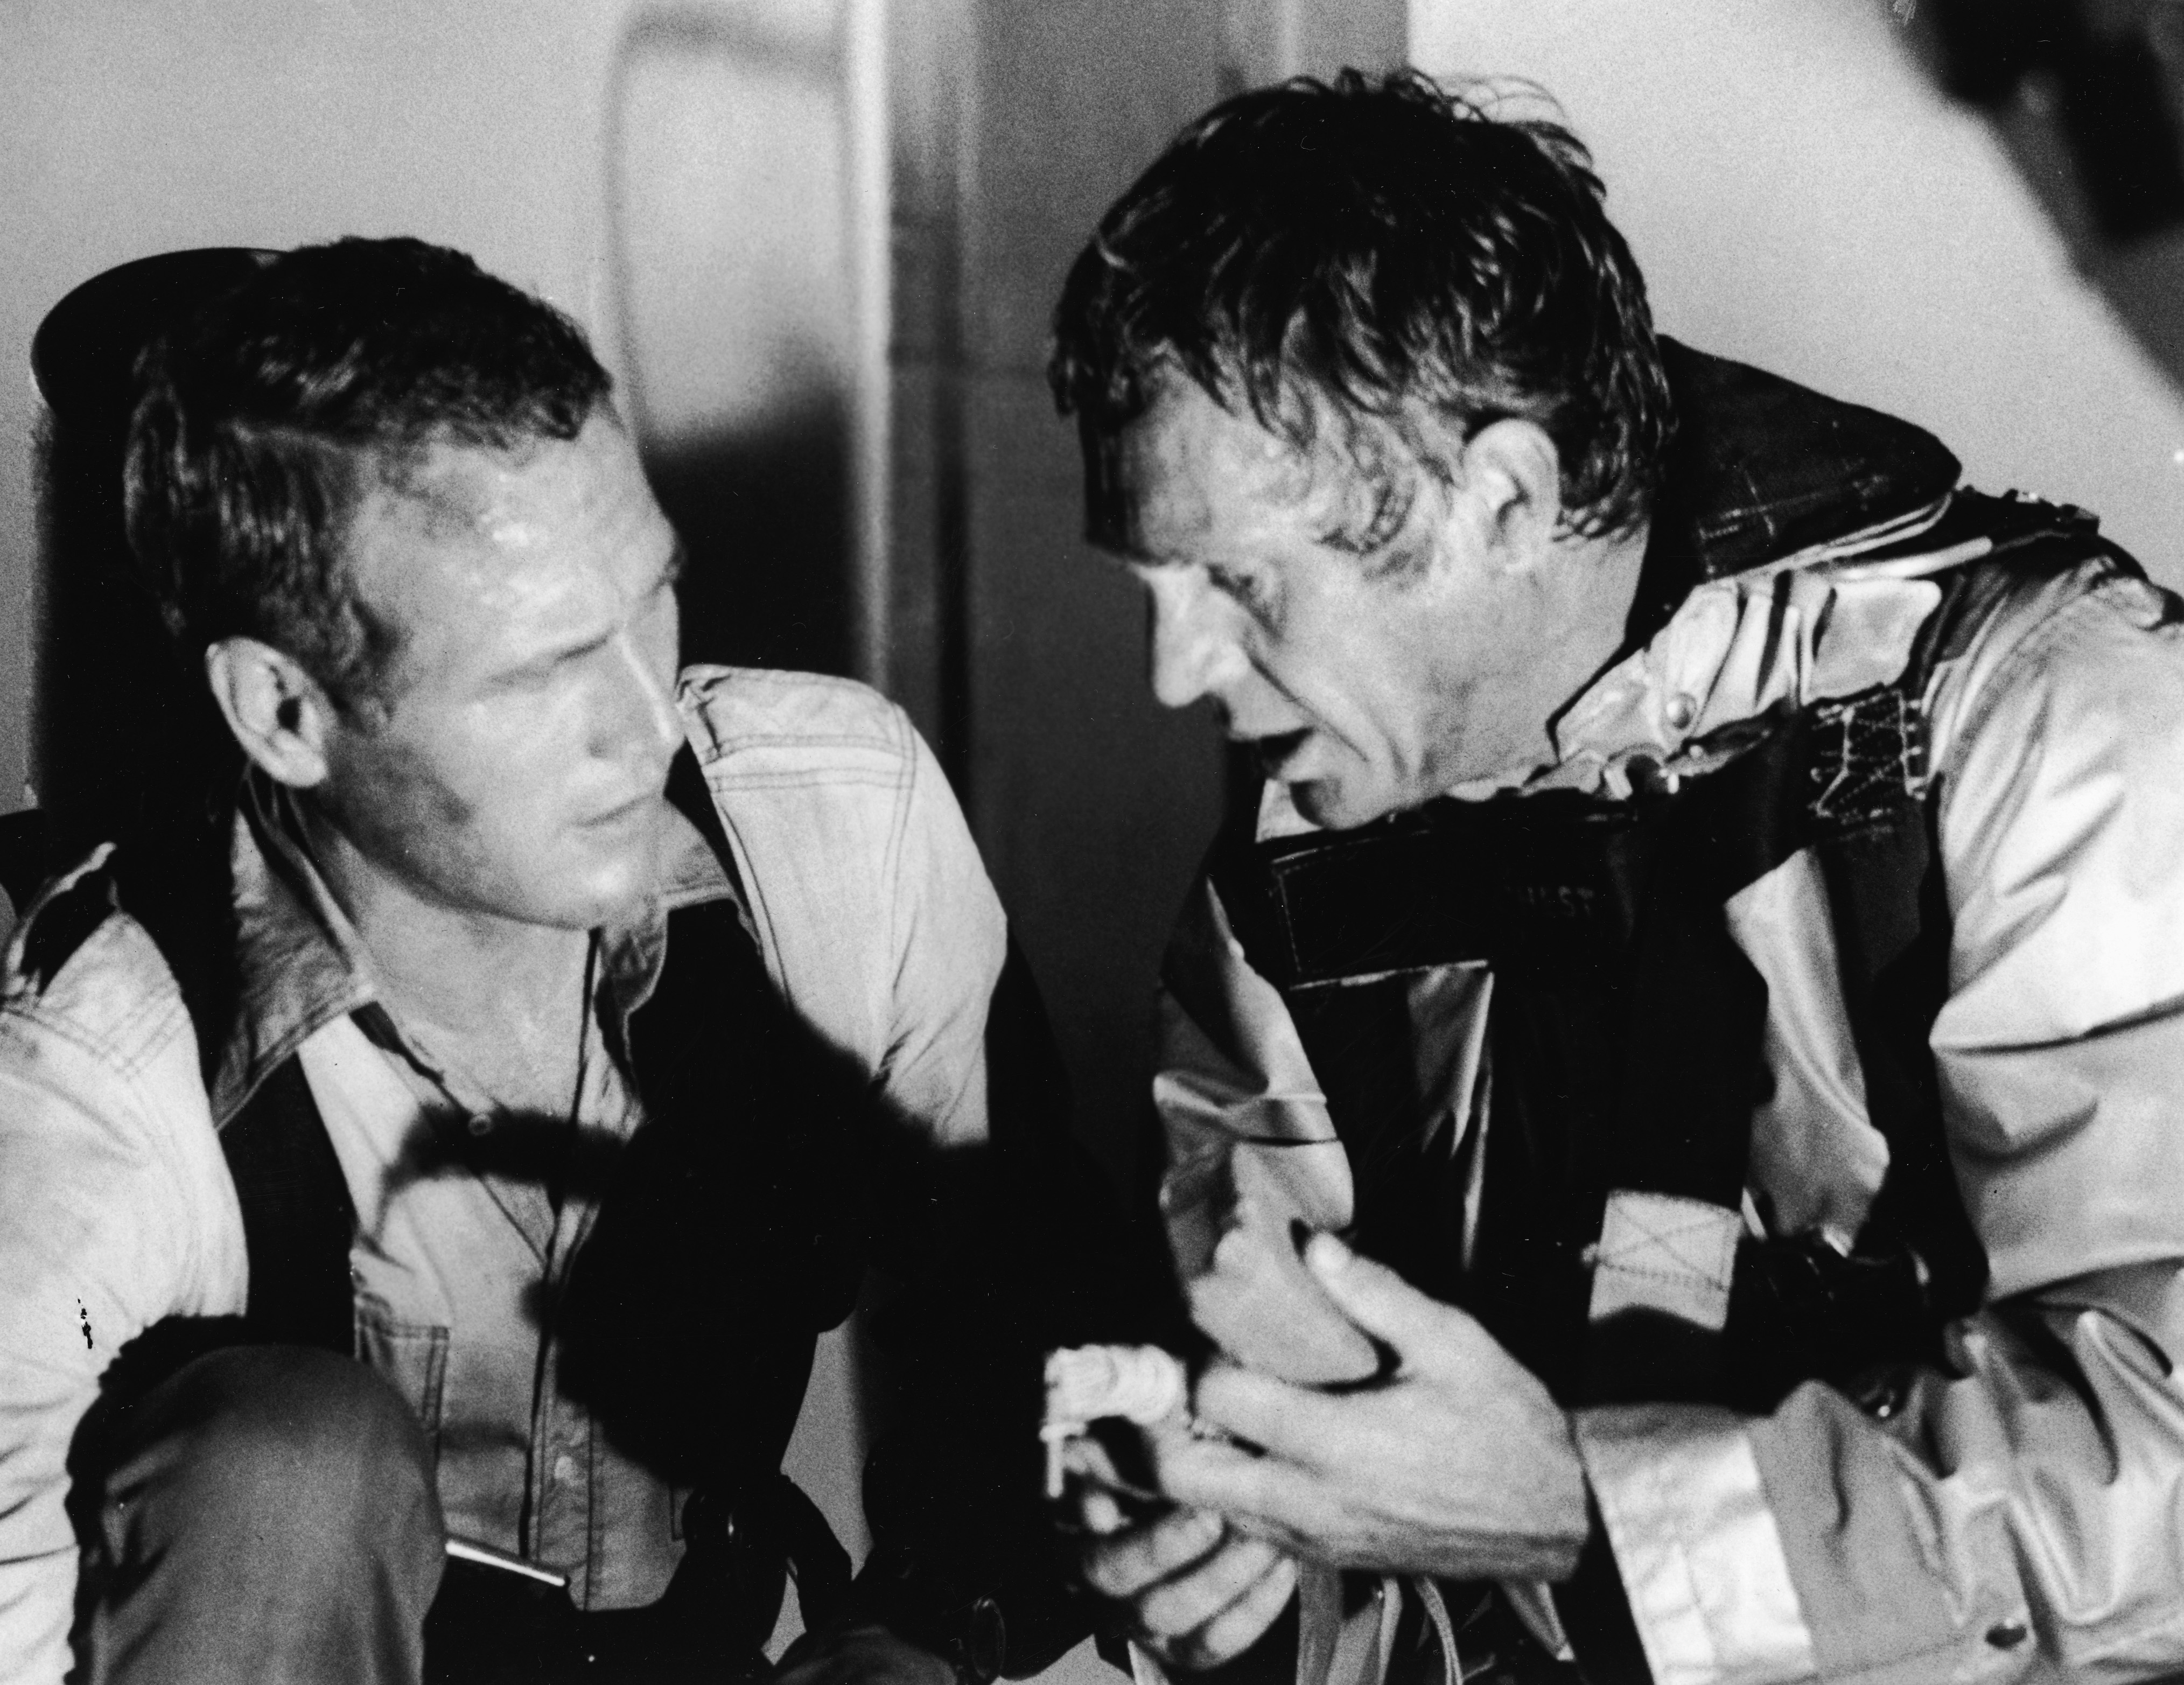 Still of Paul Newman and Steve McQueen in The Towering Inferno (1974)